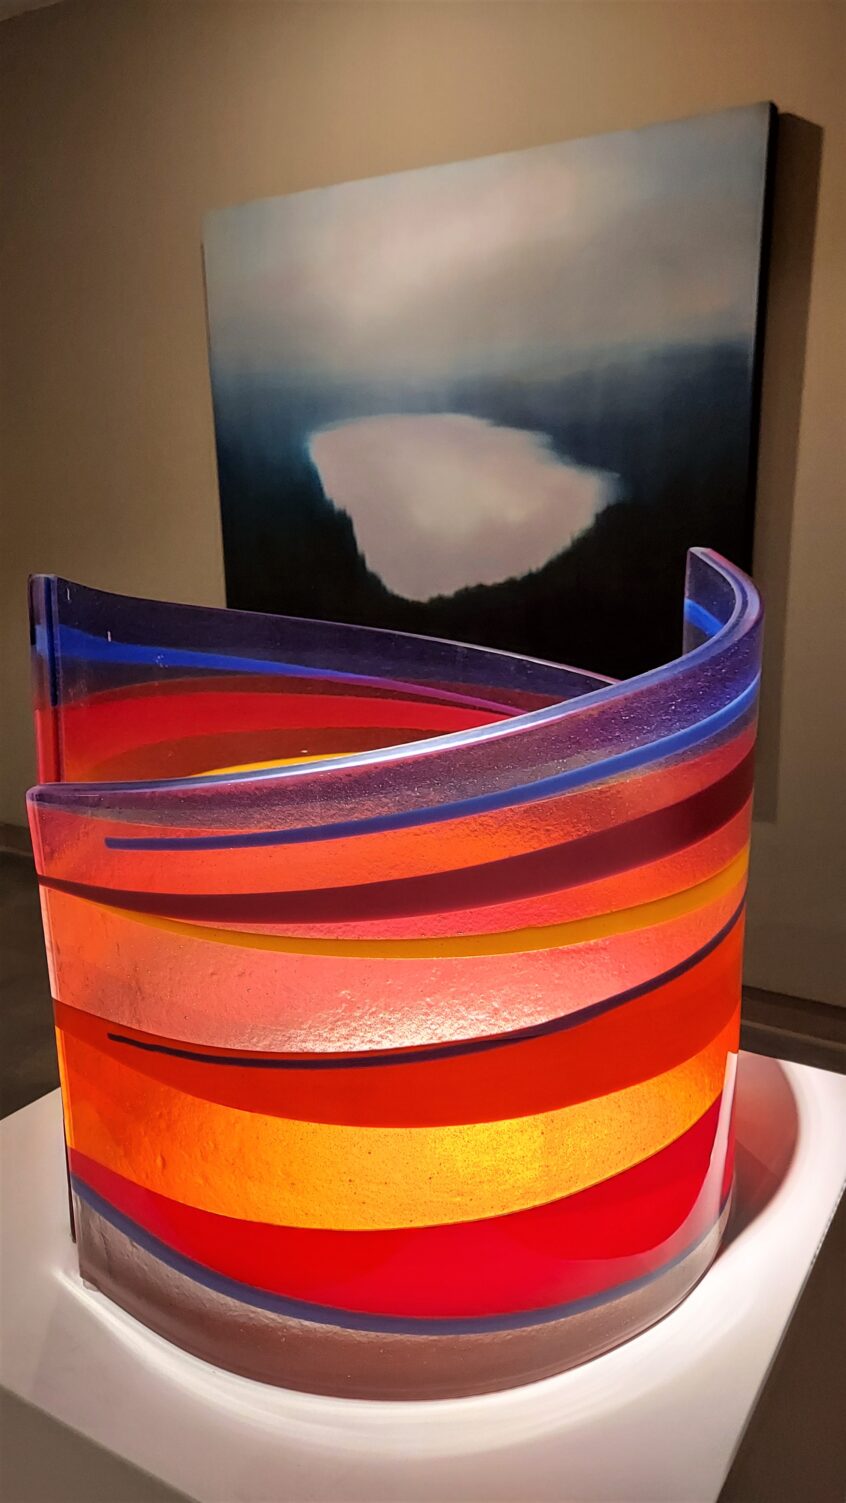 Glass and painting juxtaposed